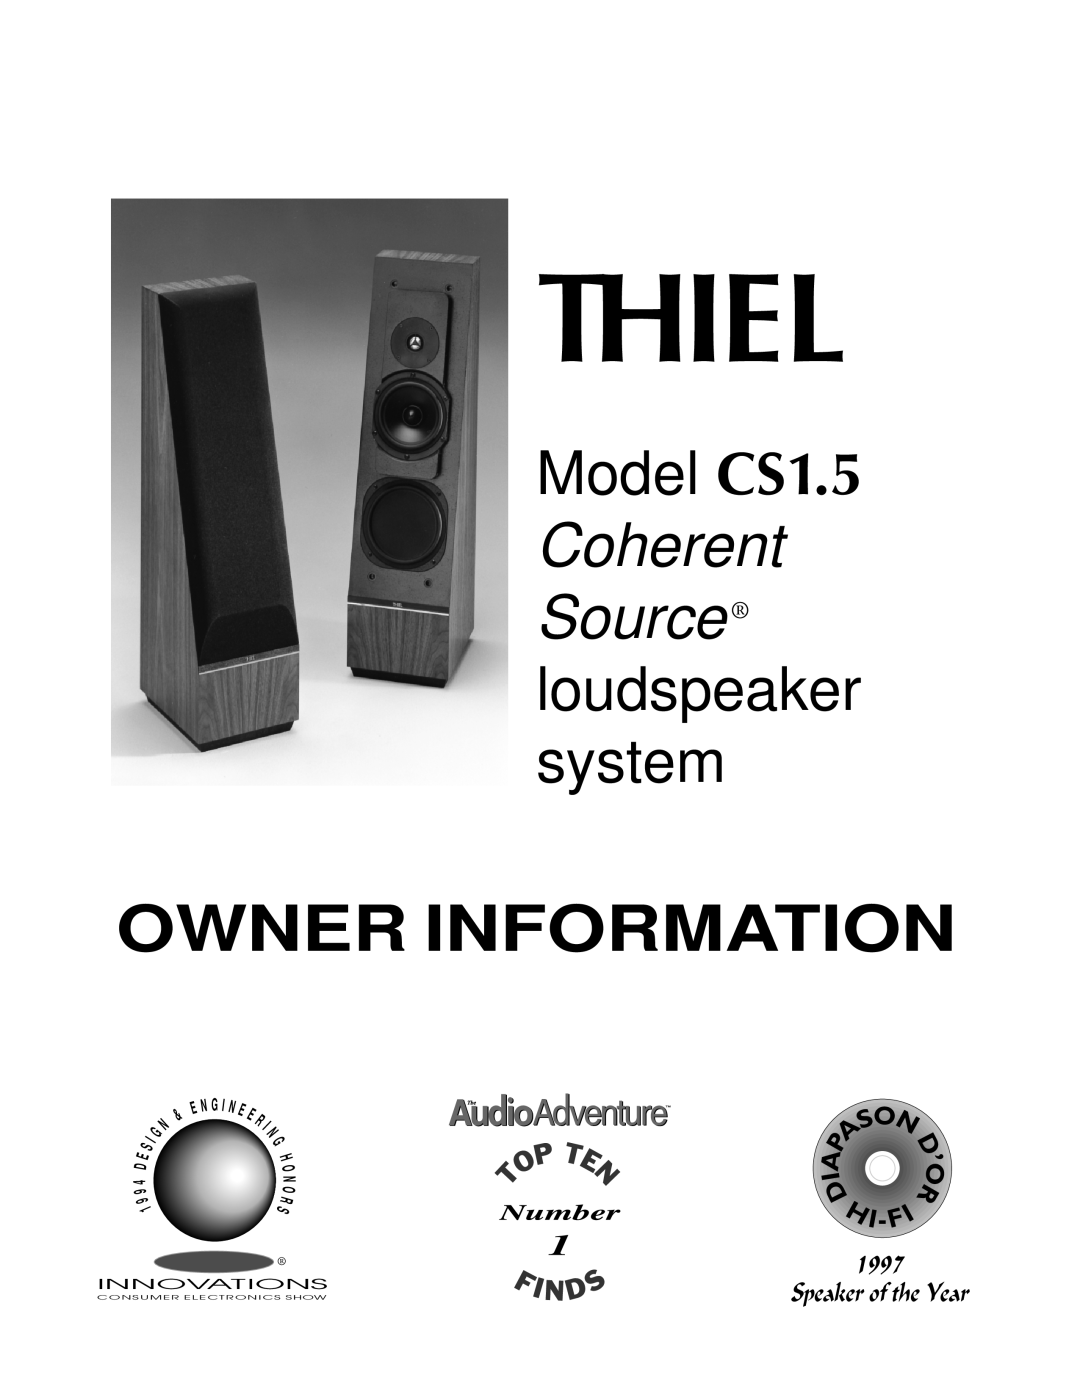 Thiel Audio Products manual Thiel, Owner Information, Model CS1.5 Coherent Source loudspeaker system, 1997, Innovations 